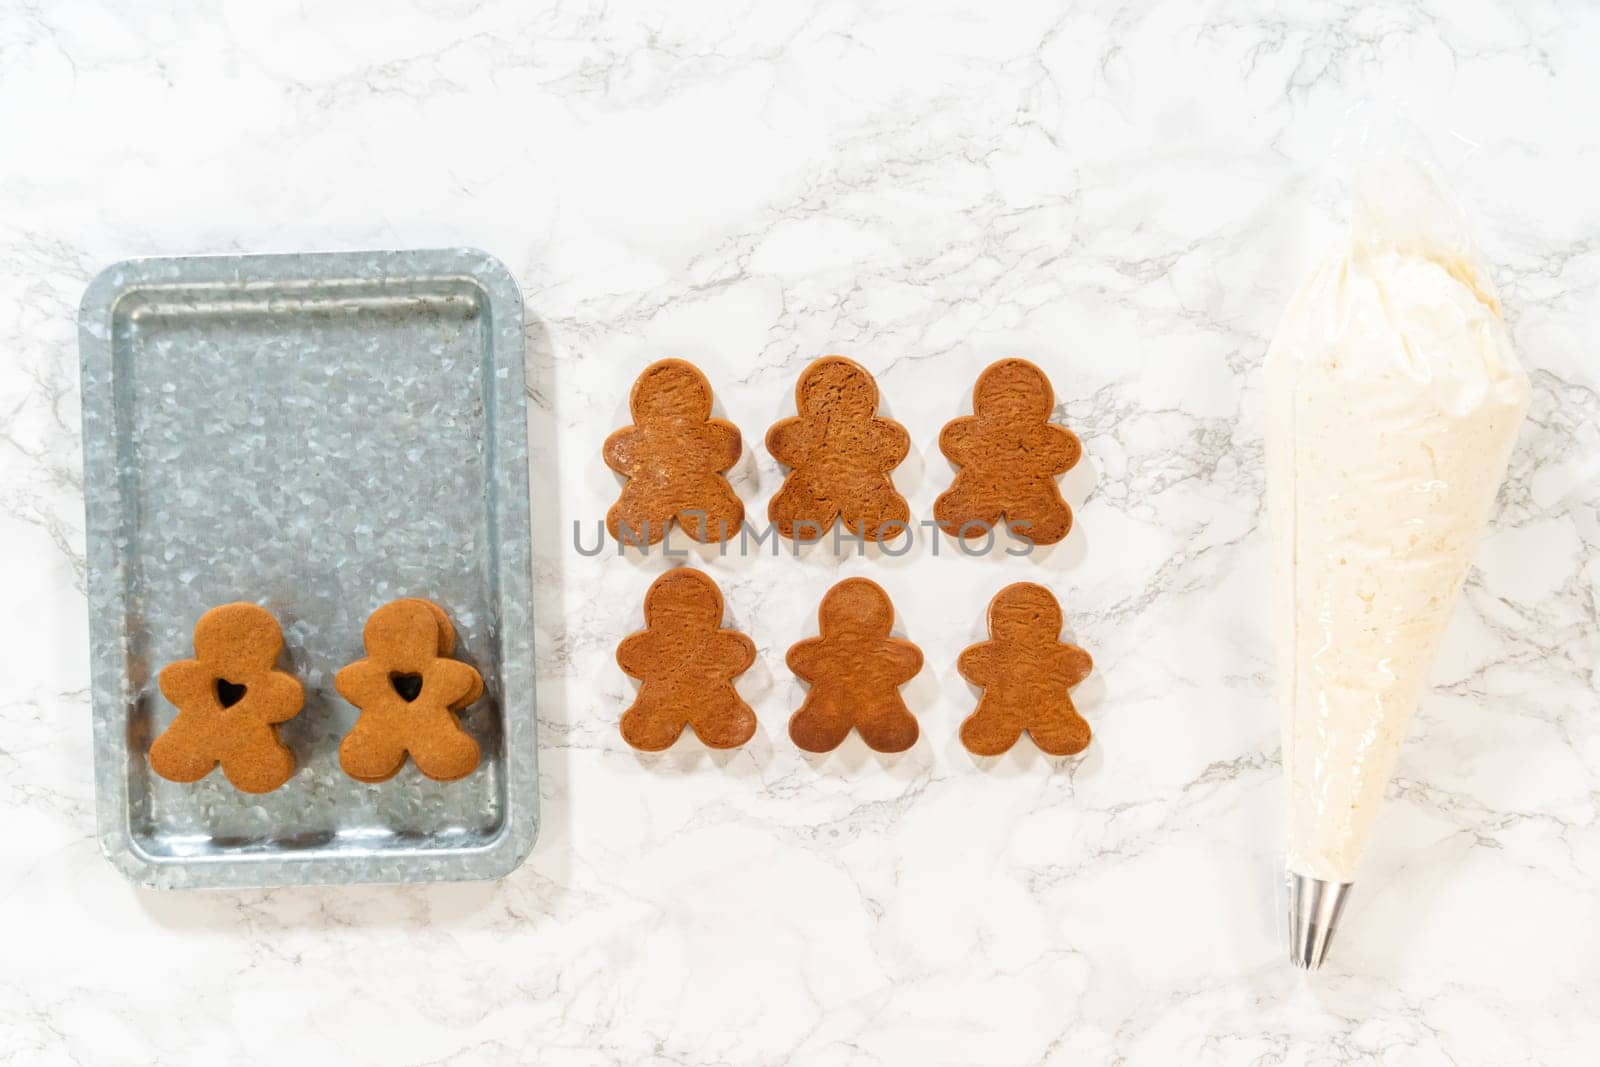 Flat lay. Gingerbread cookies await their second halves on a marble surface, each meticulously piped with buttercream to craft delightful sandwich treats. The precision of the piping adds a festive touch.